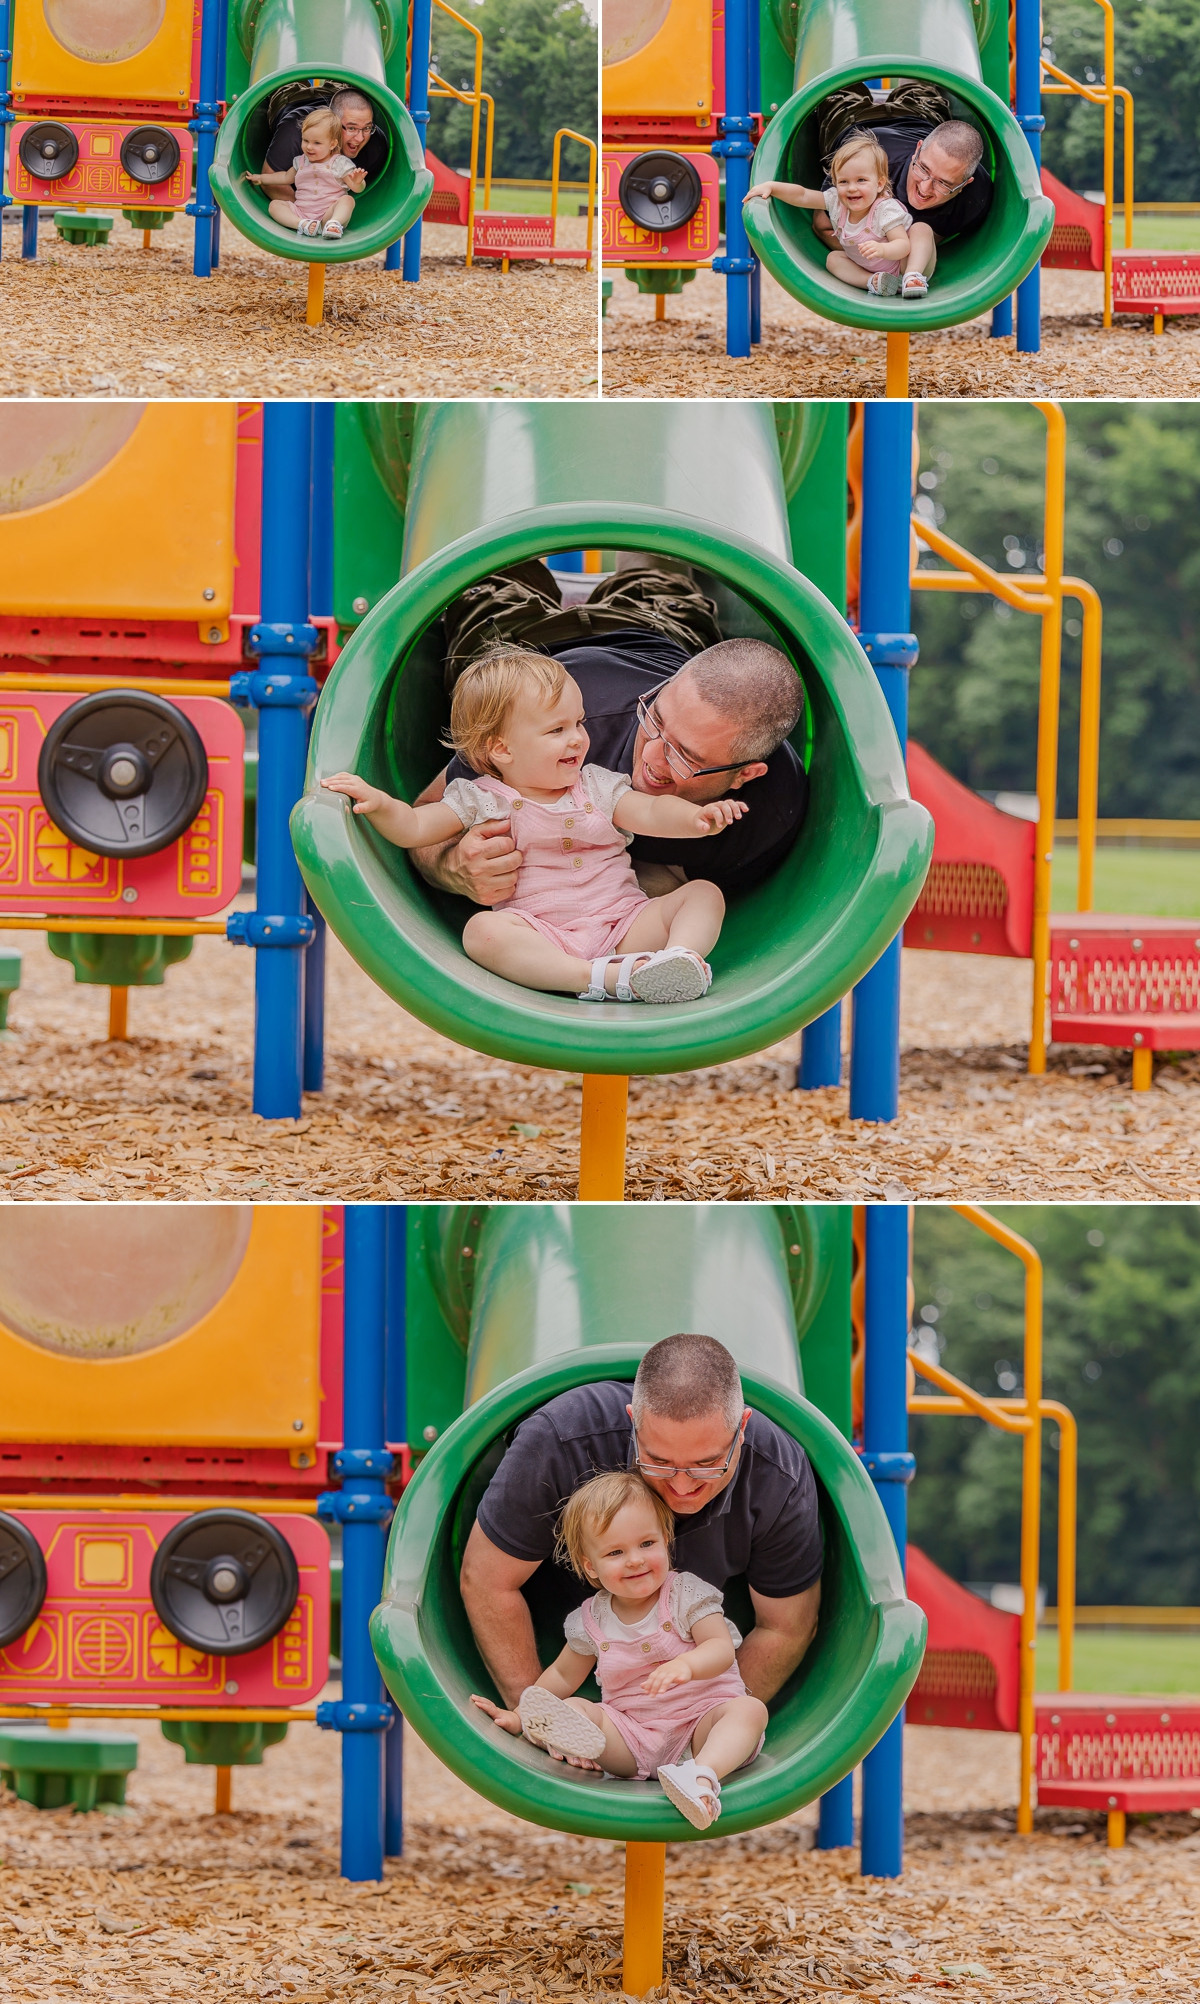 Abigail and her dad on the slide together, photos taken by a Virginia family photographer